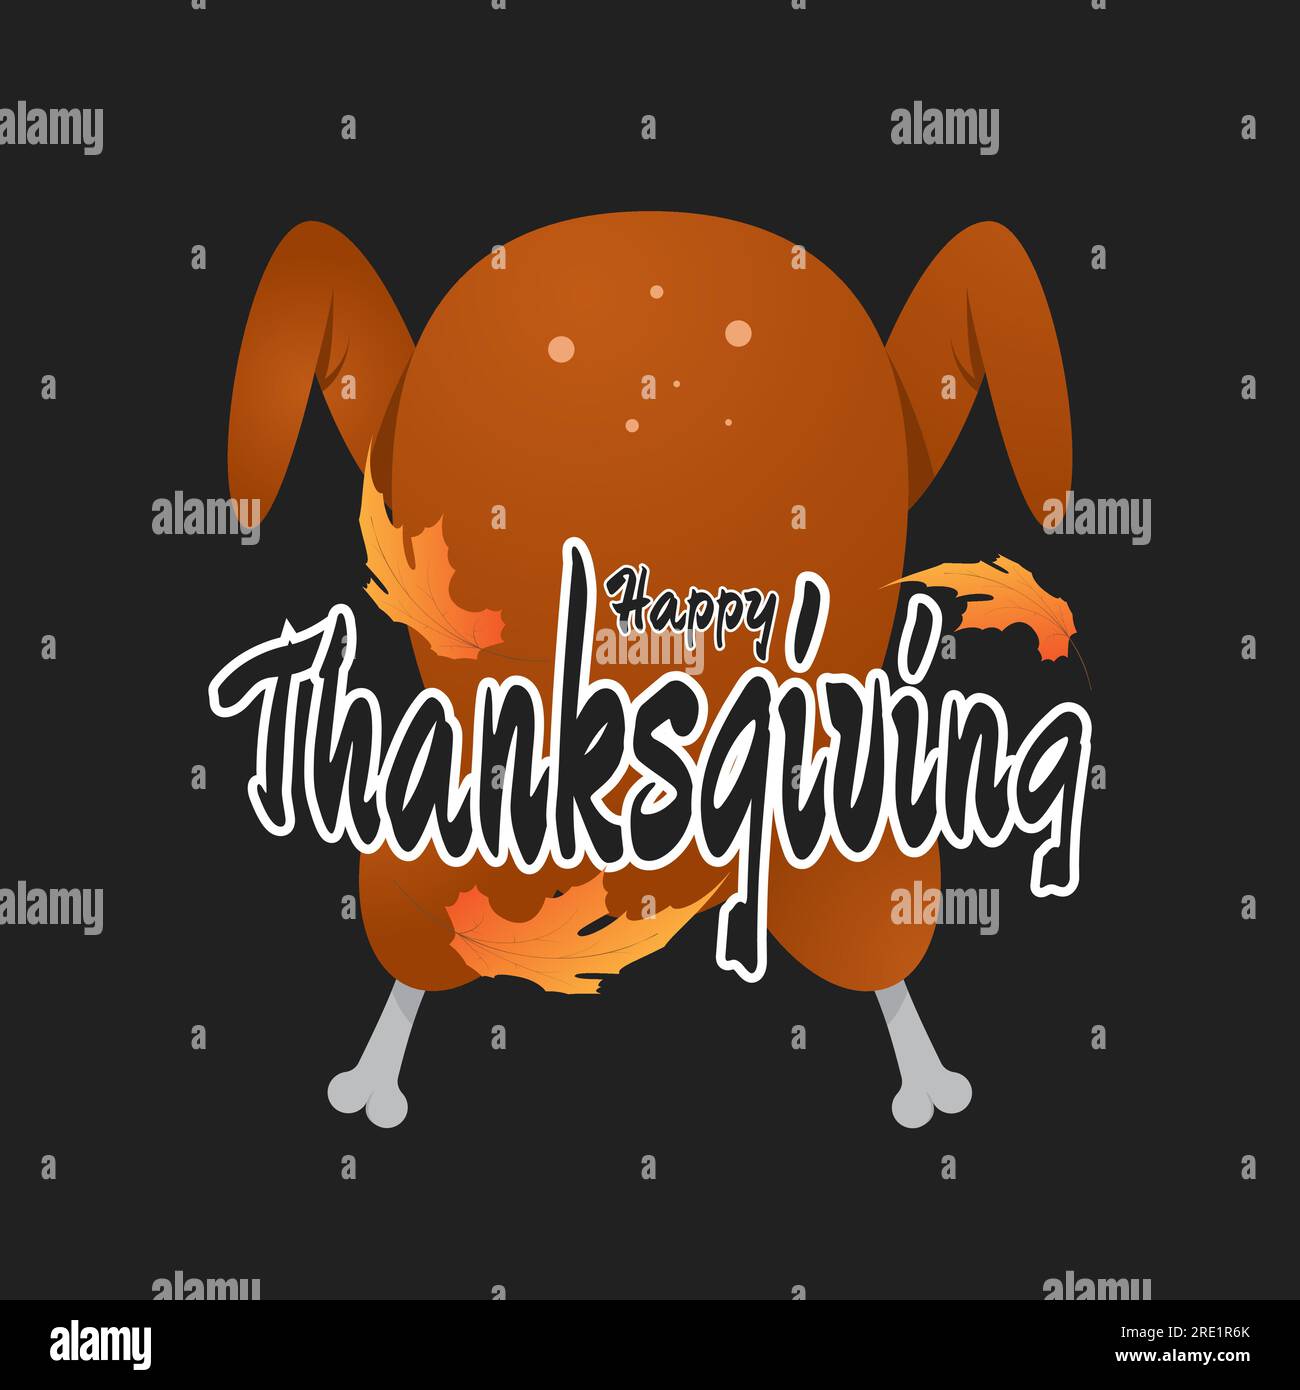 happy thanks giving background with roasted turkey and leaves. suitable for banner, greeting card, poster, etc. vector illustration Stock Vector